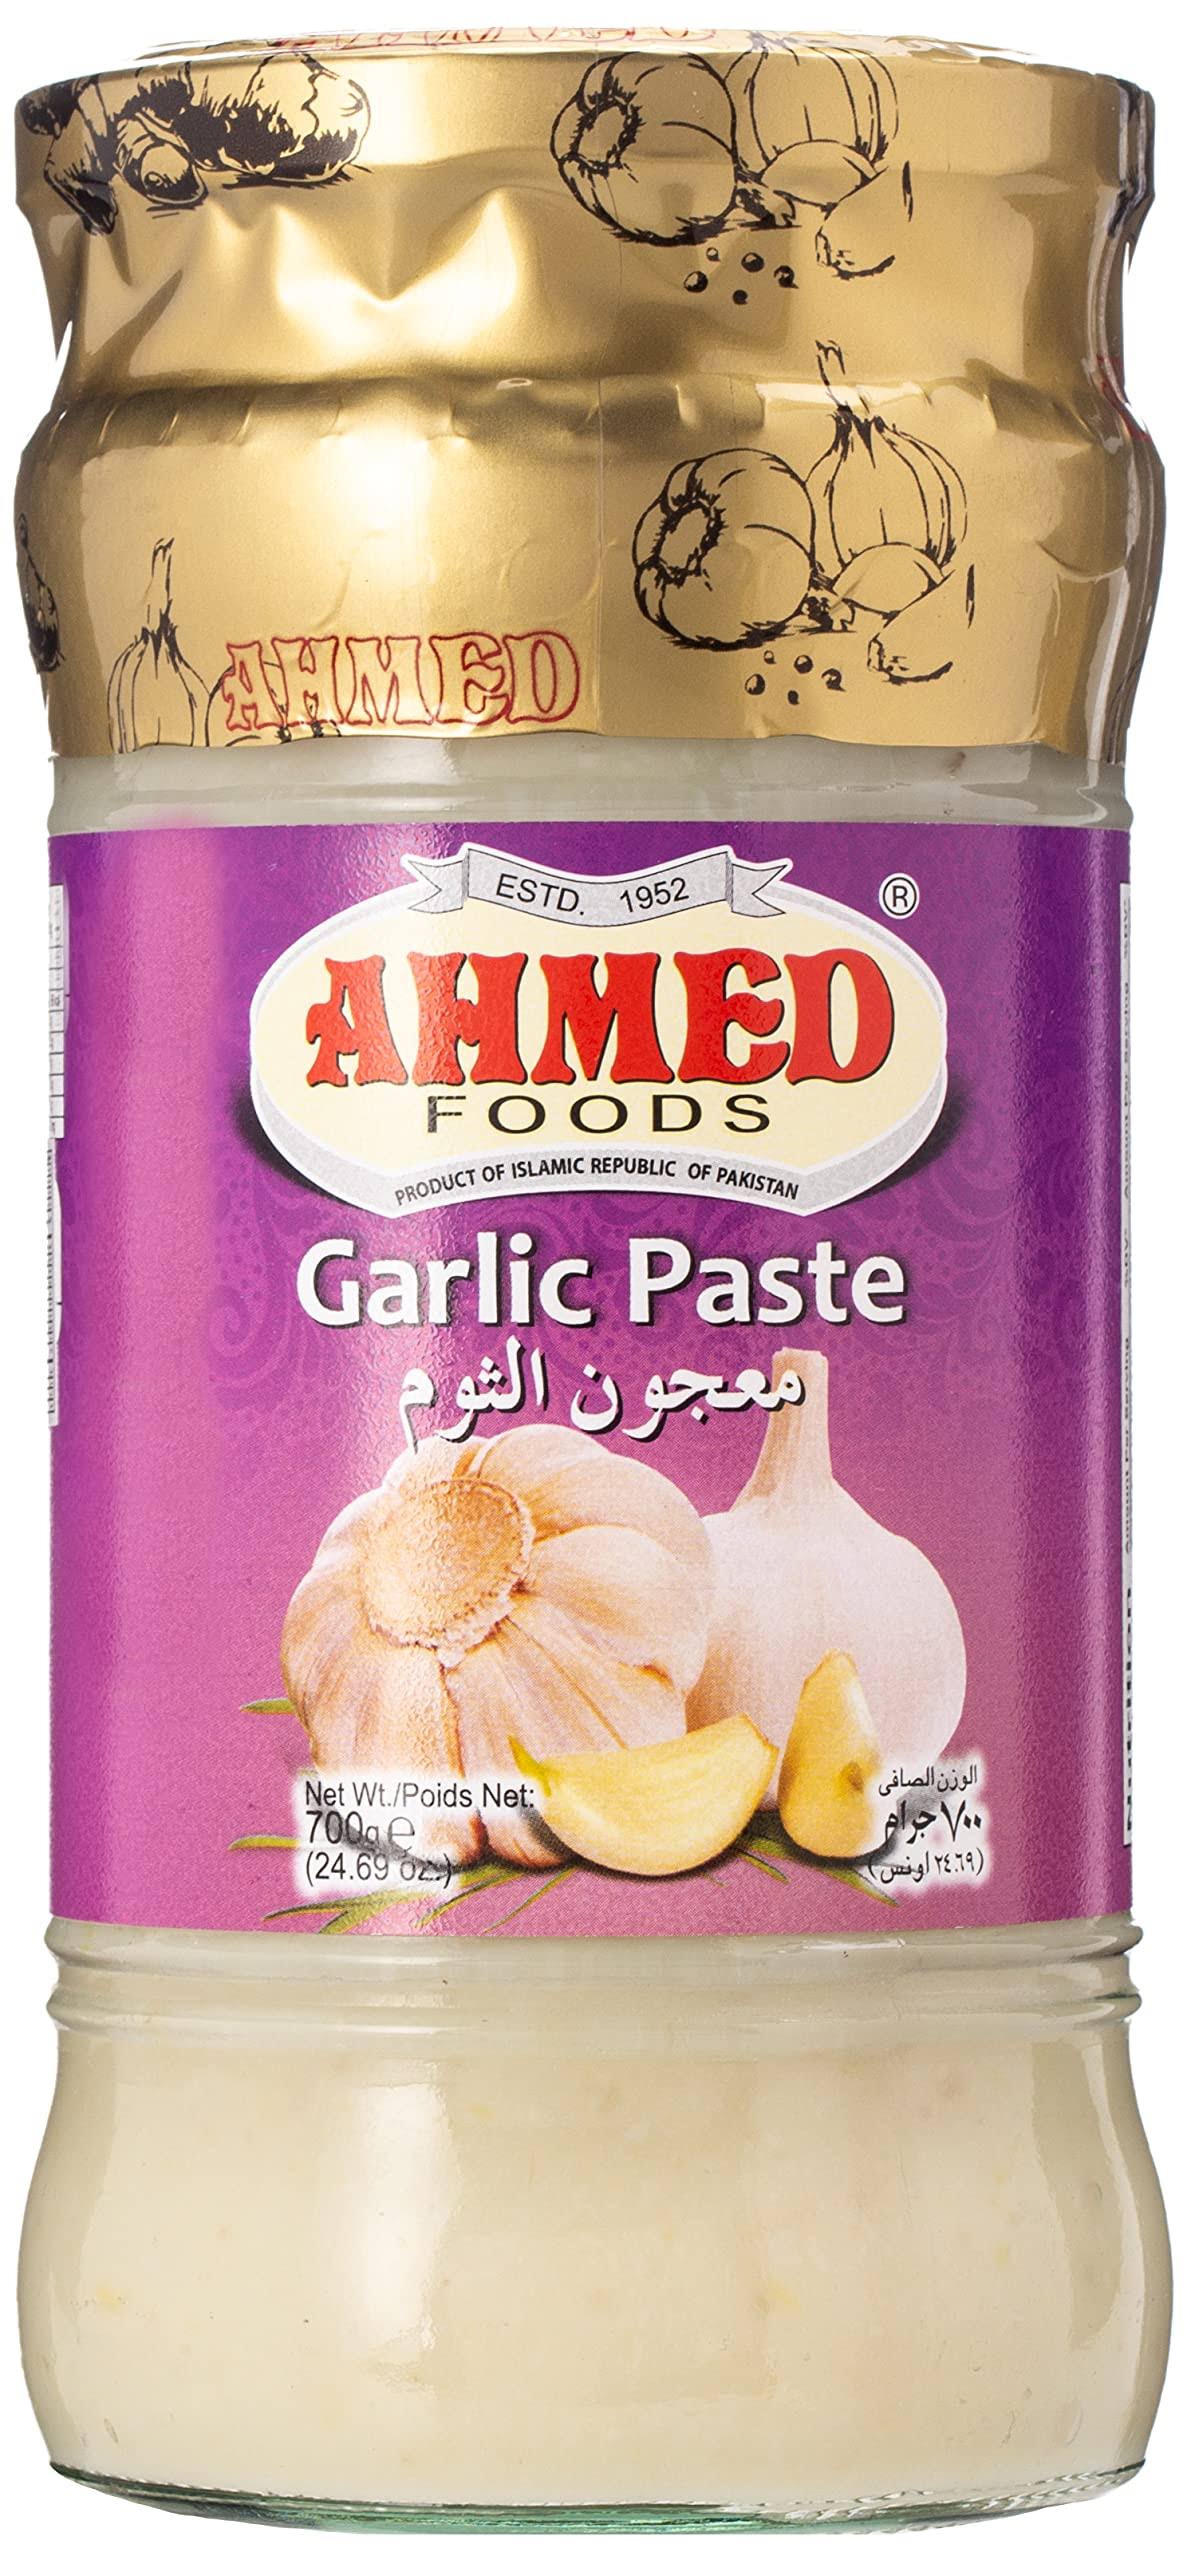 Ahmed Garlic Paste | Grocery Delivery Service | SaveCo Online Ltd